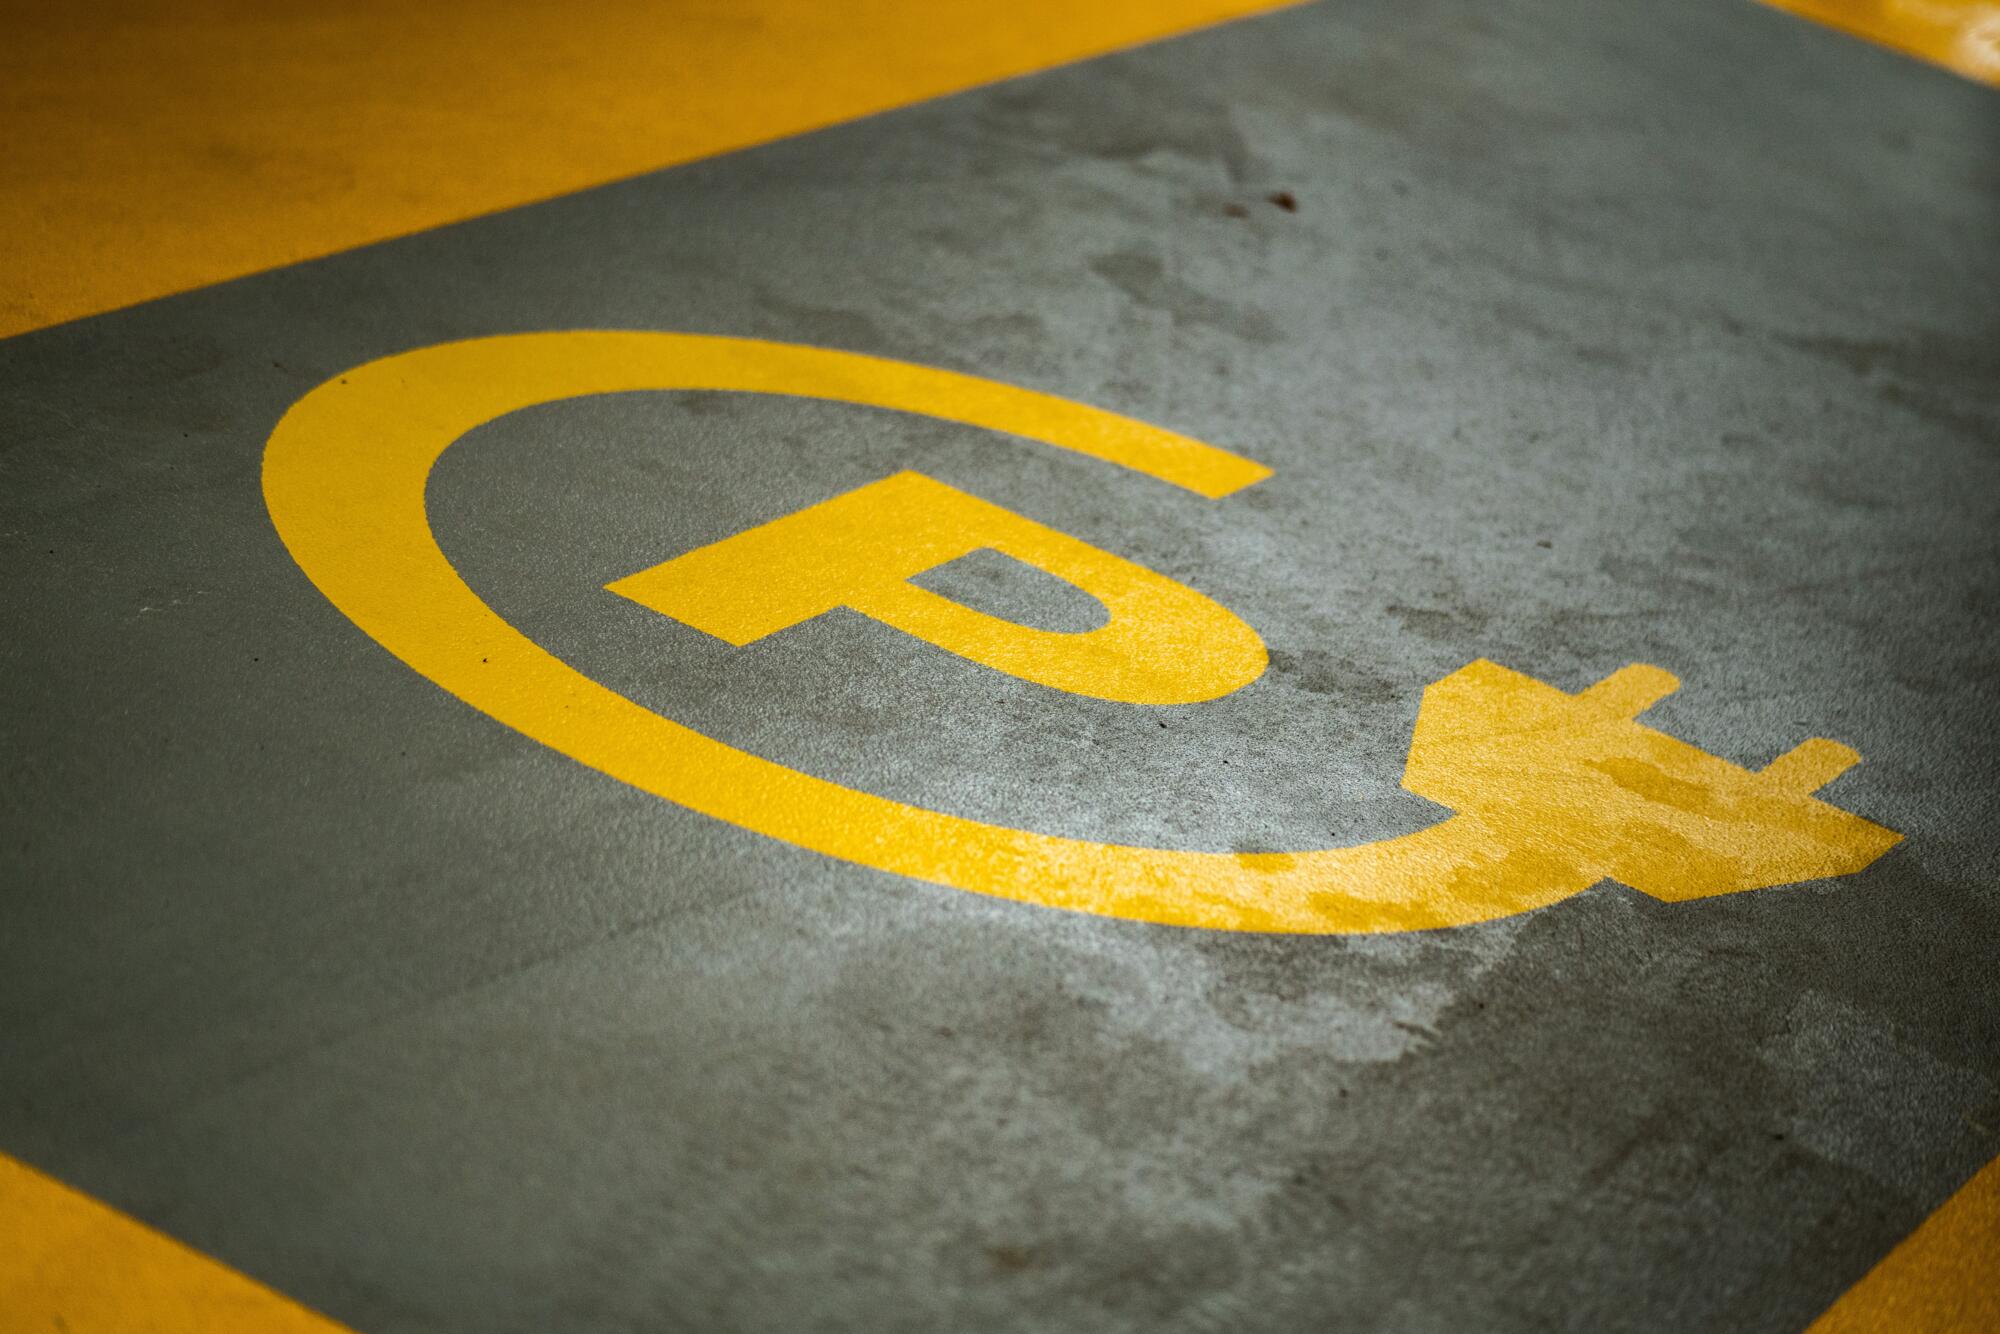 Eurelectric and EY release report on accelerating e-mobility